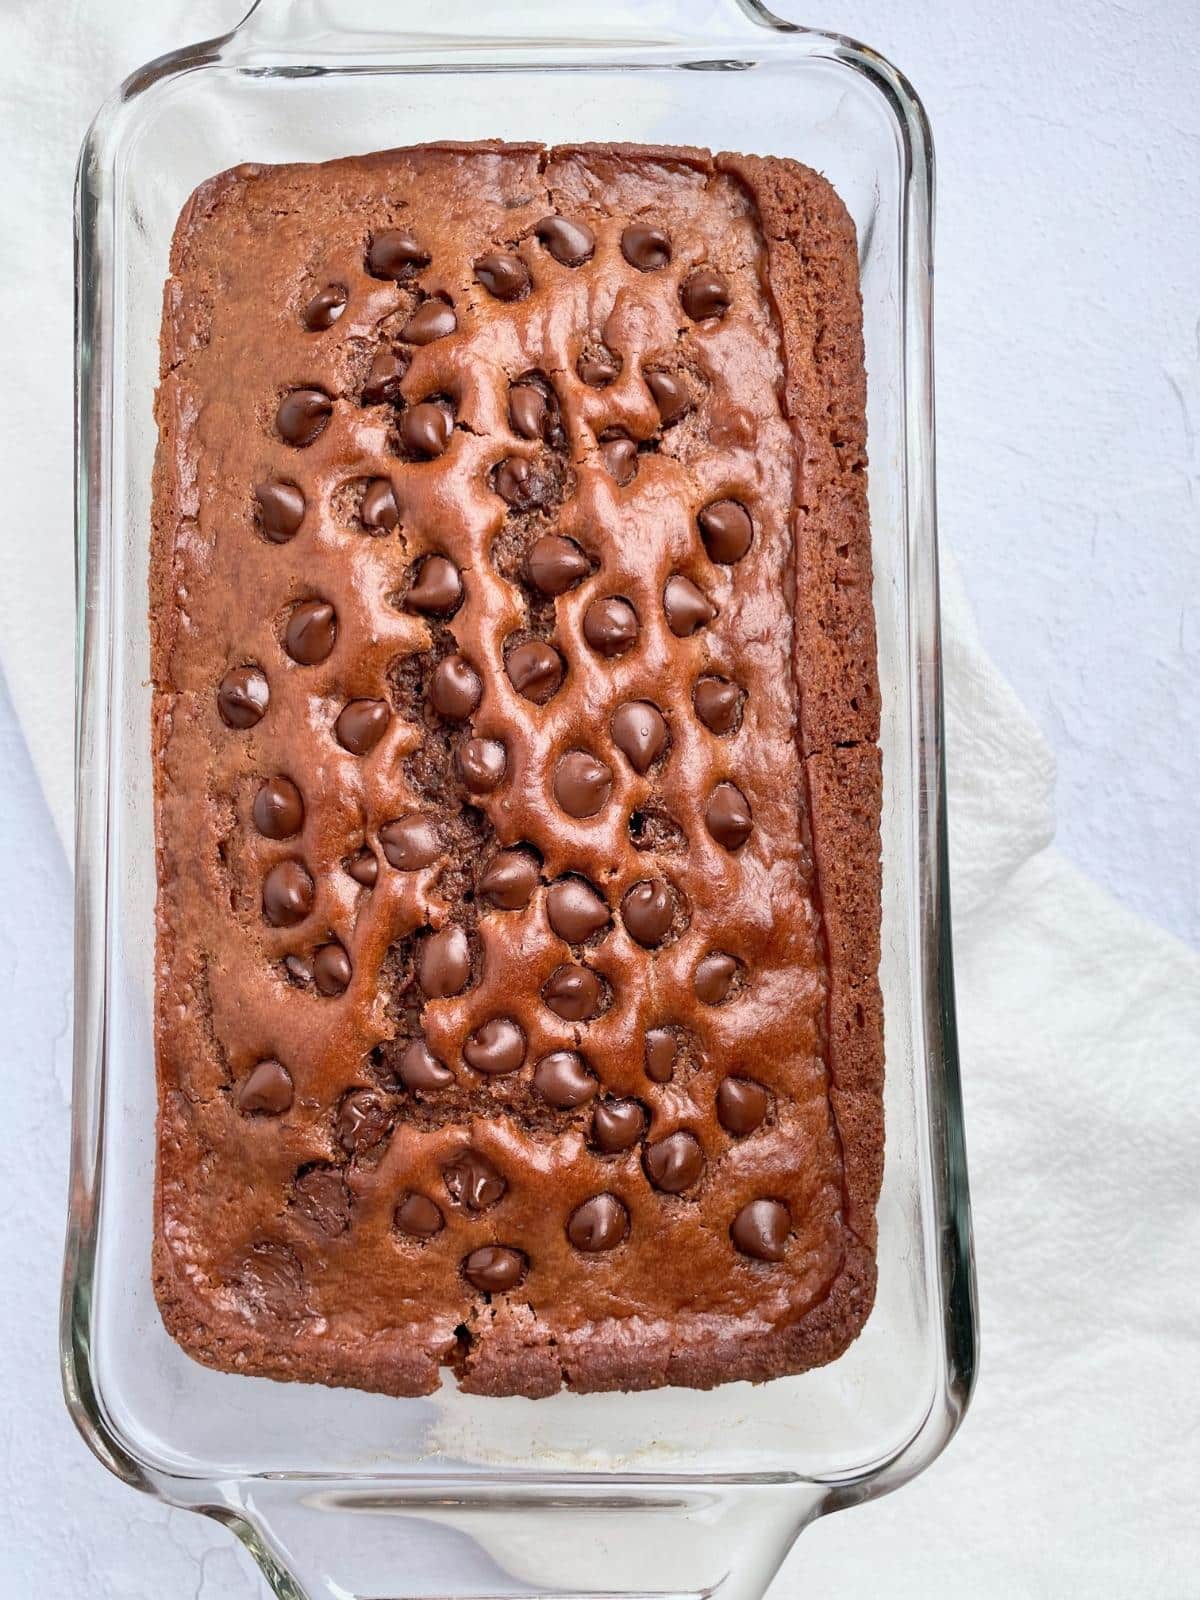 Baked chocolate bread.